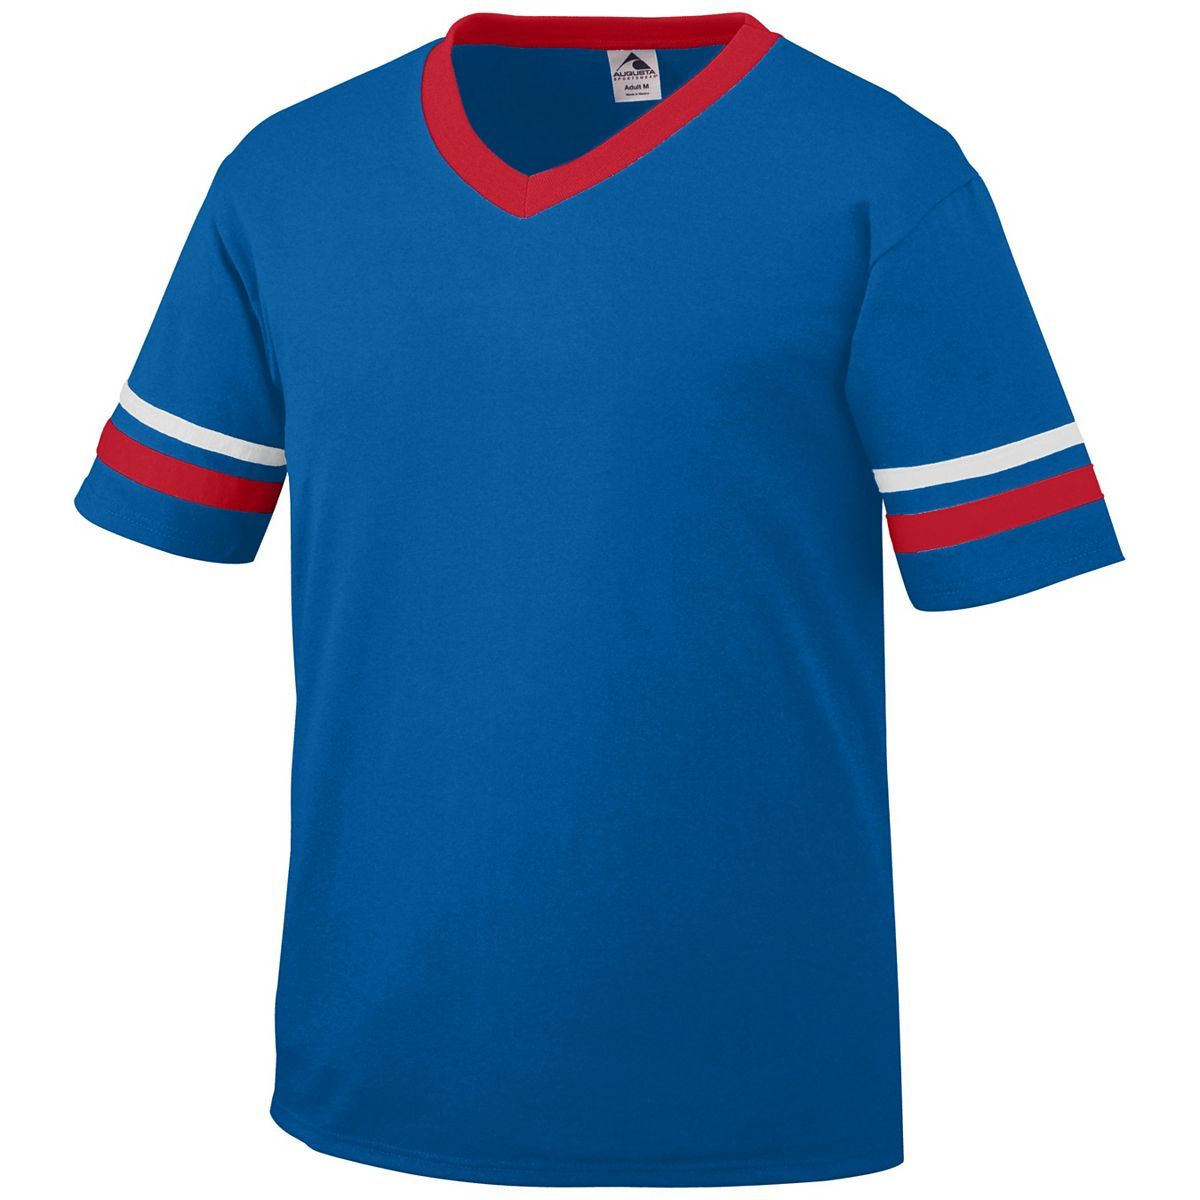 Augusta Sportswear Youth Sleeve Stripe Jersey in Royal/Red/White  -Part of the Youth, Youth-Jersey, Augusta-Products, Shirts product lines at KanaleyCreations.com